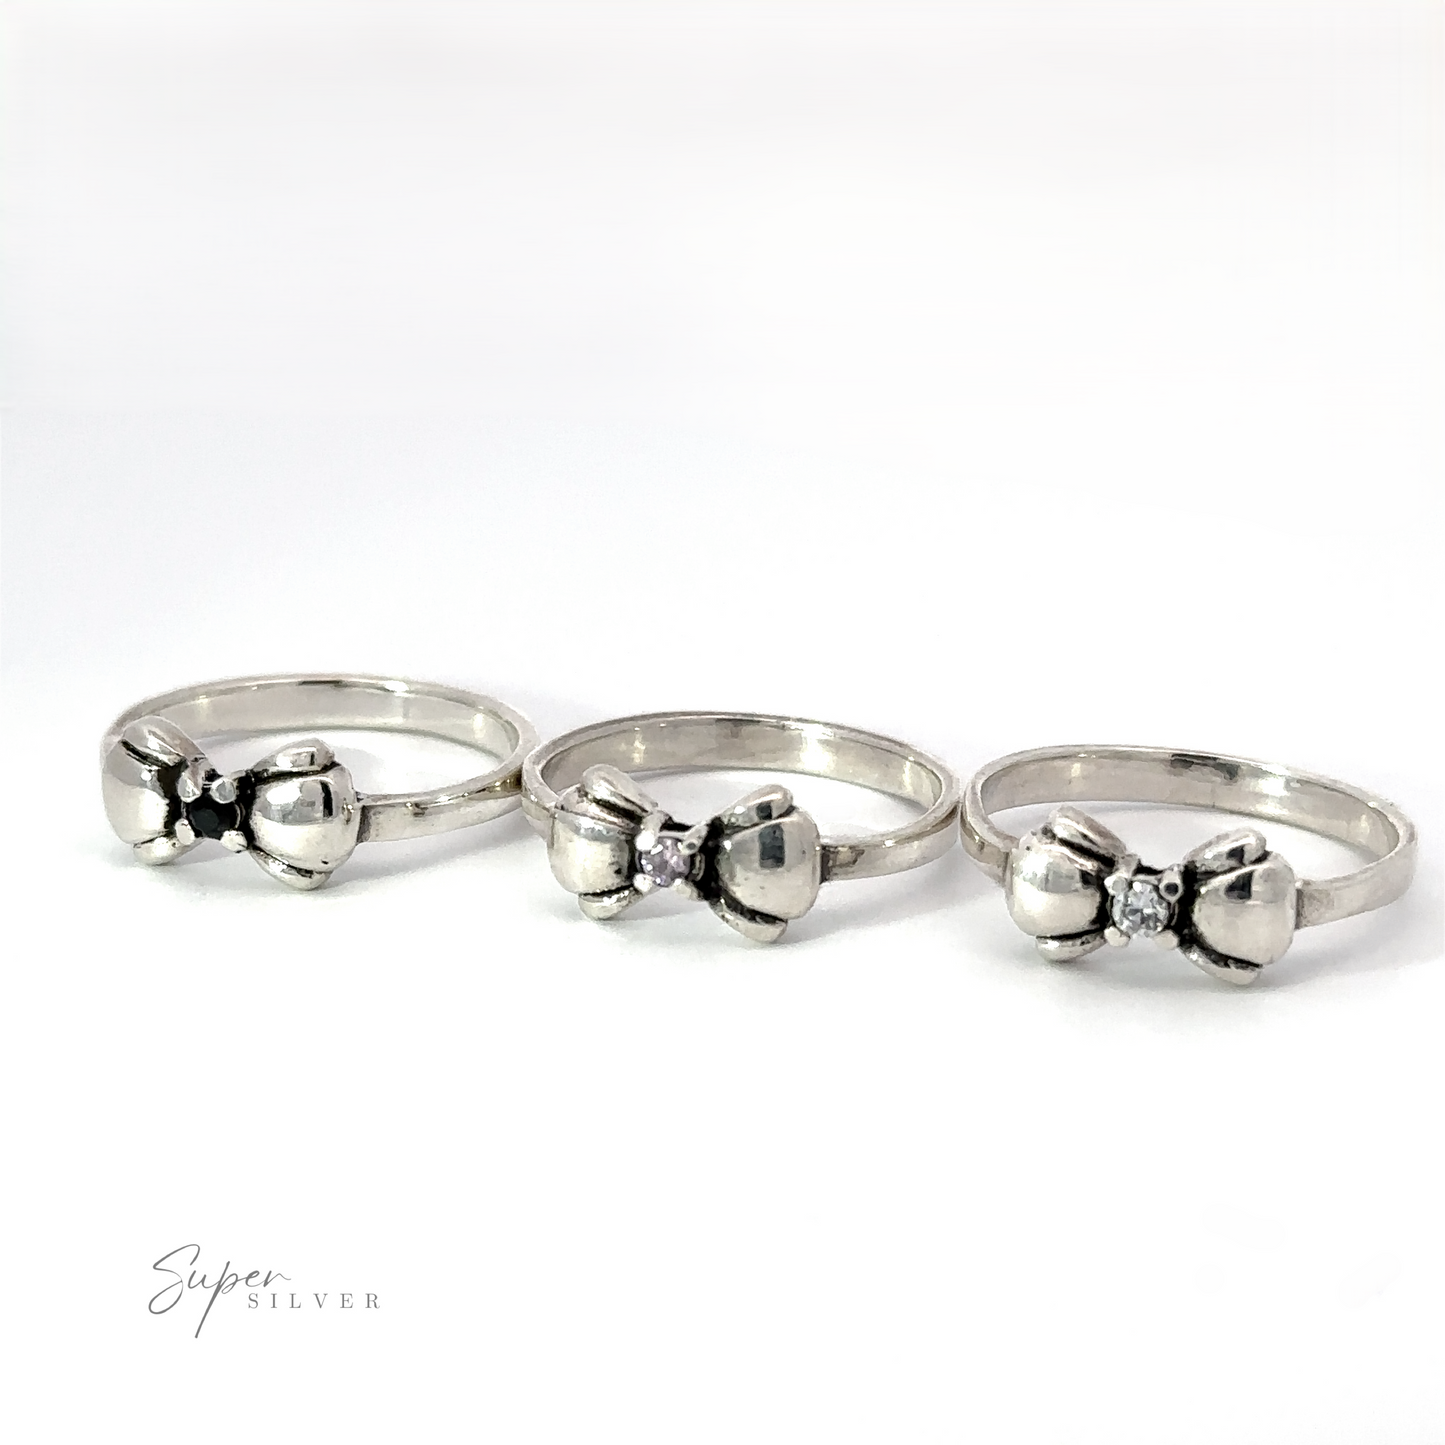 
                  
                    Three Adorable Cubic Zirconia Bow Rings with elegant designs are displayed in a row on a plain background. The middle bow ring appears slightly larger. The text "Super Silver" is in the lower left corner.
                  
                